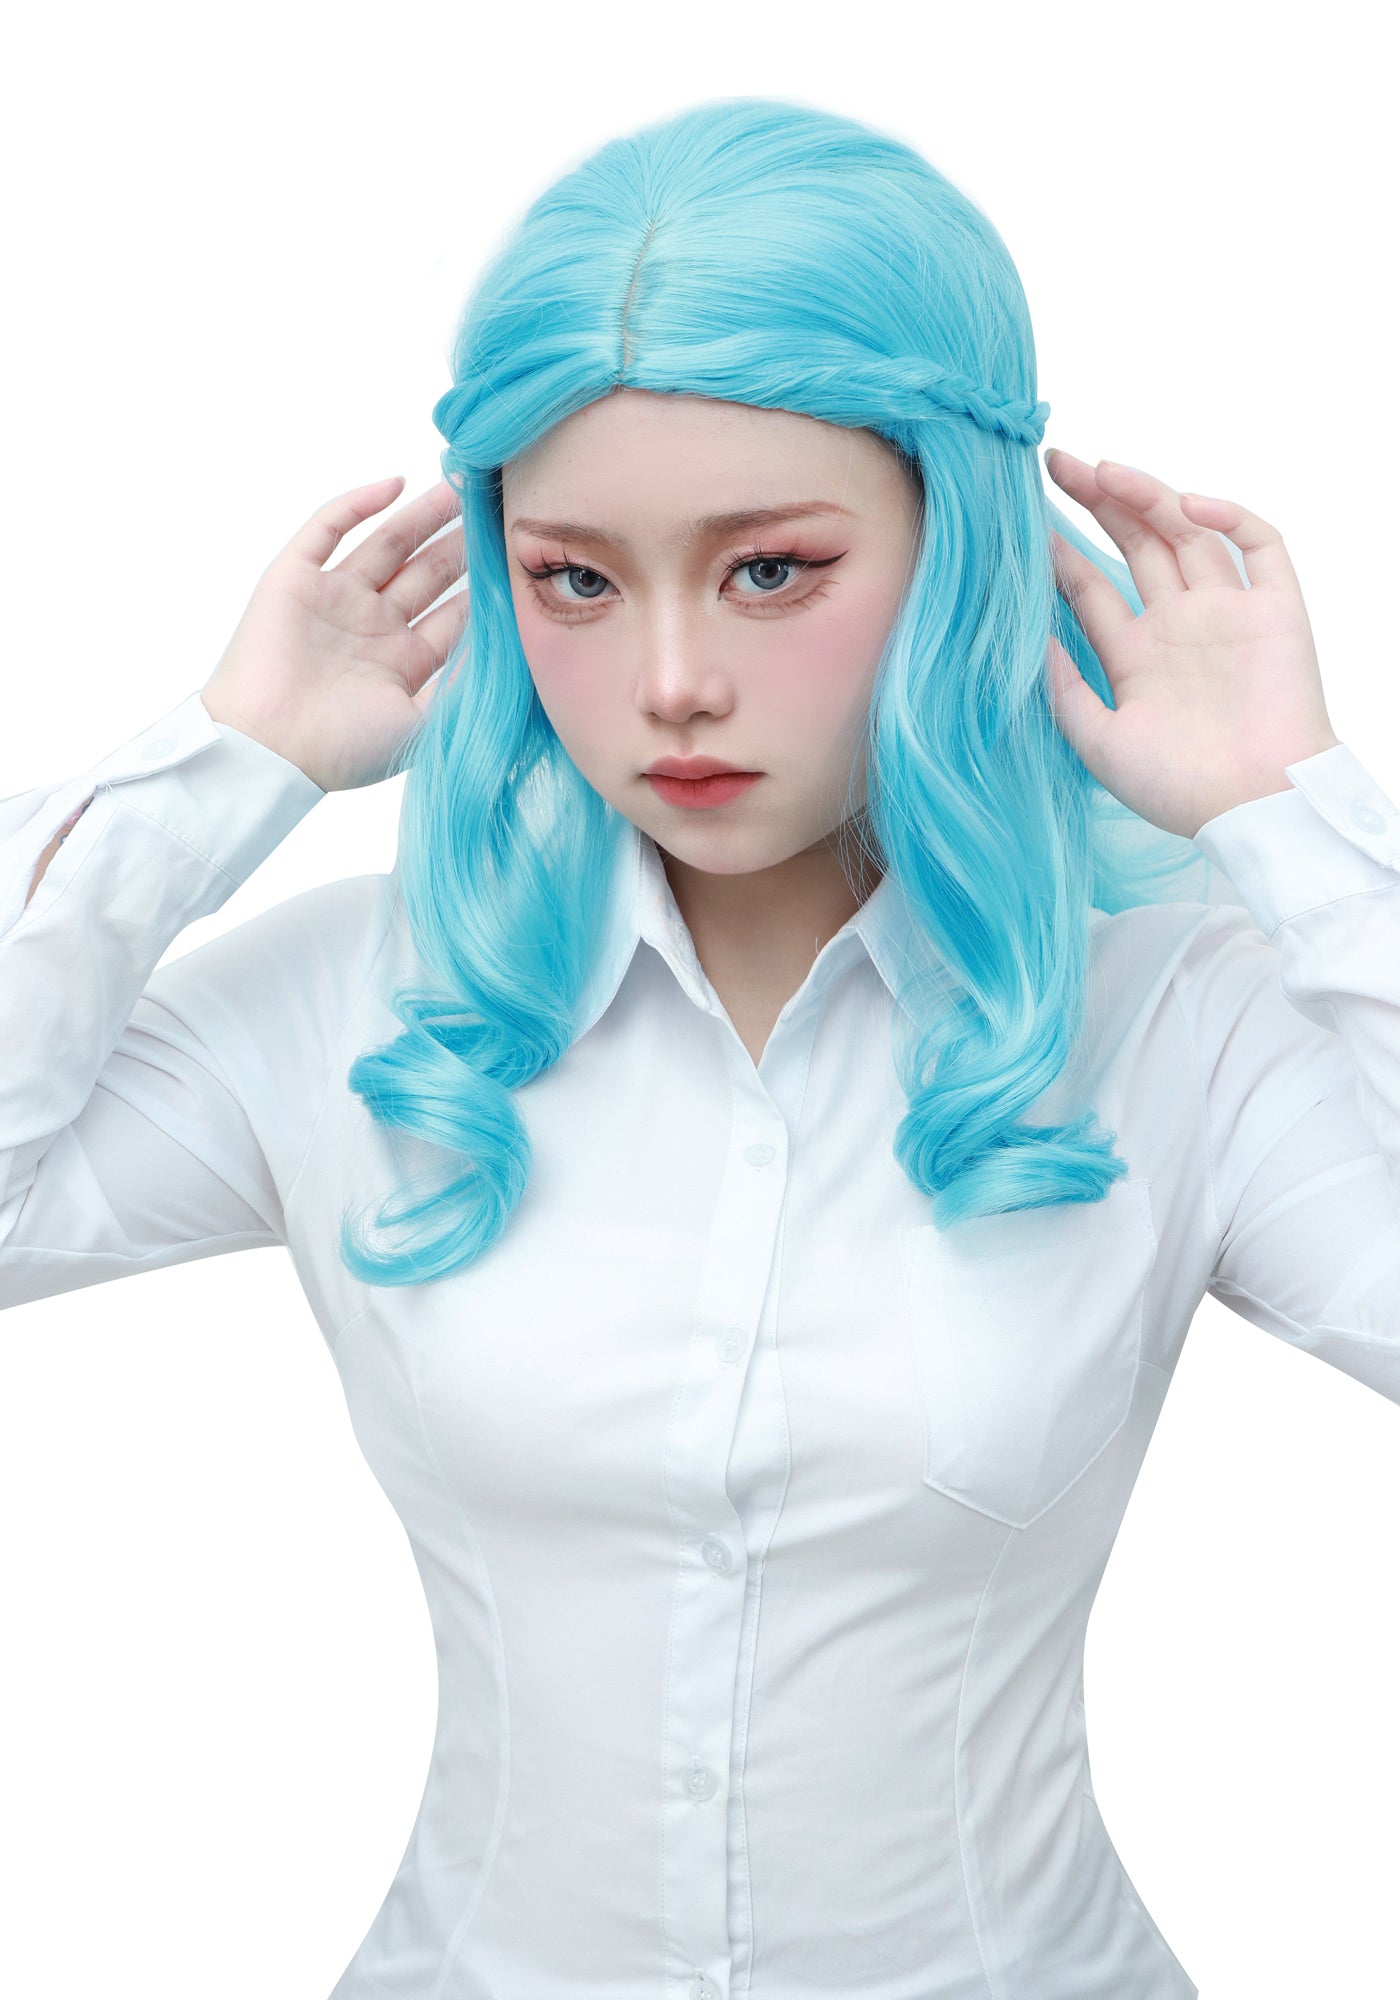 Blue Long Wavy Wig Braid Curly Wave Wig for Adults Kid Halloween Cosplay Costume